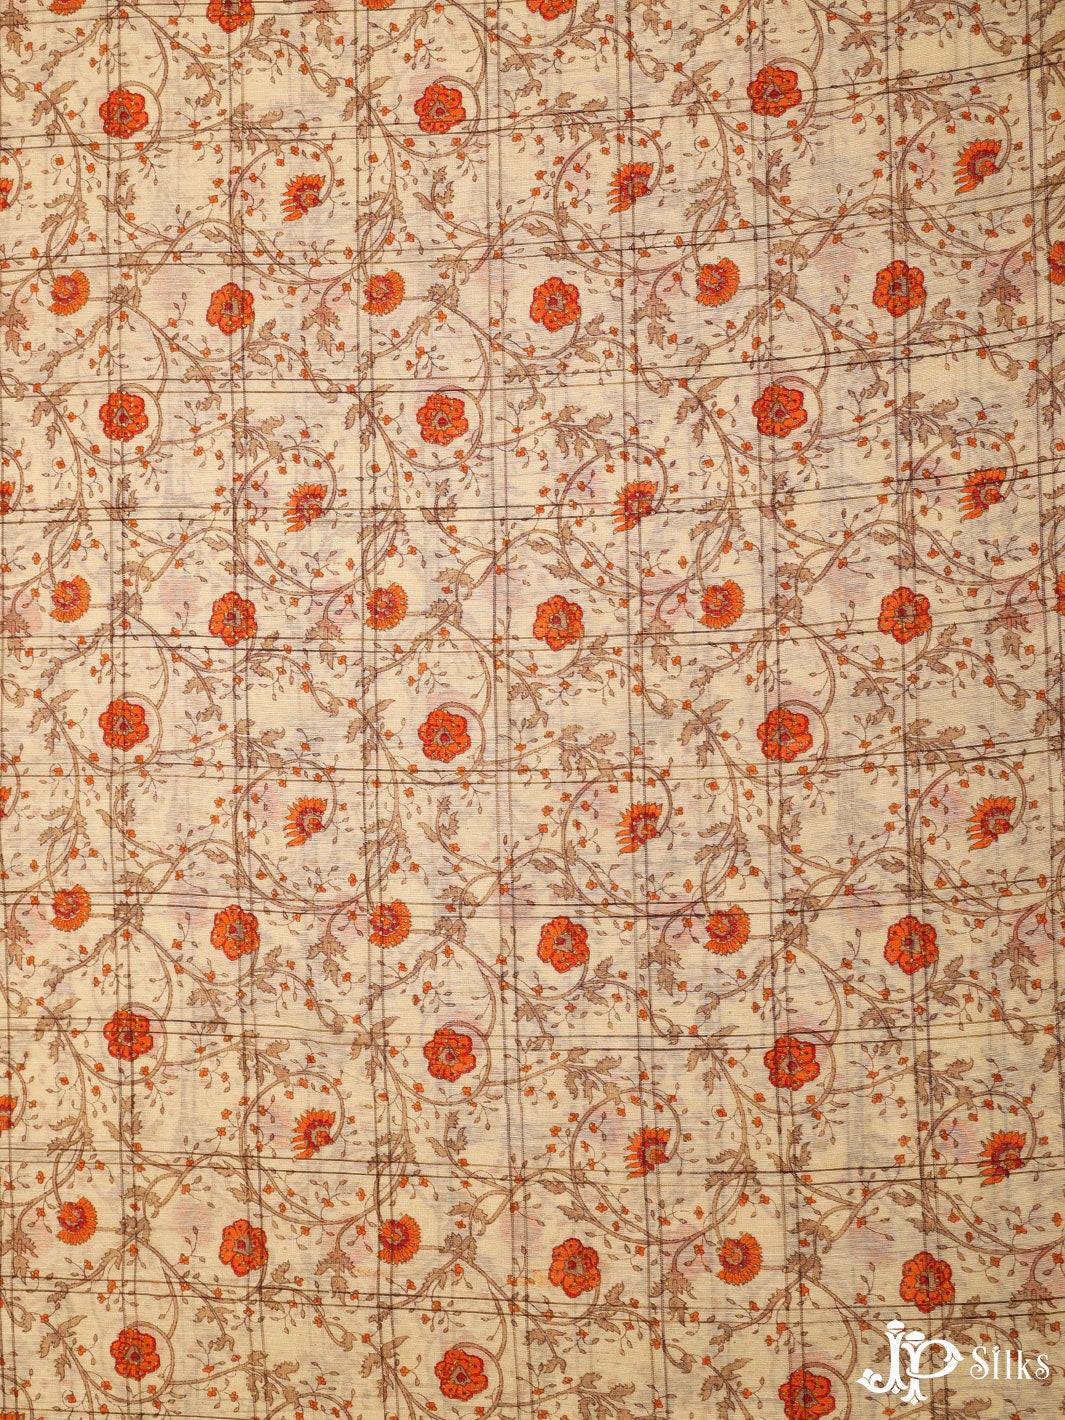 Beige and orange Cotton Fabric - A6516 - View 1